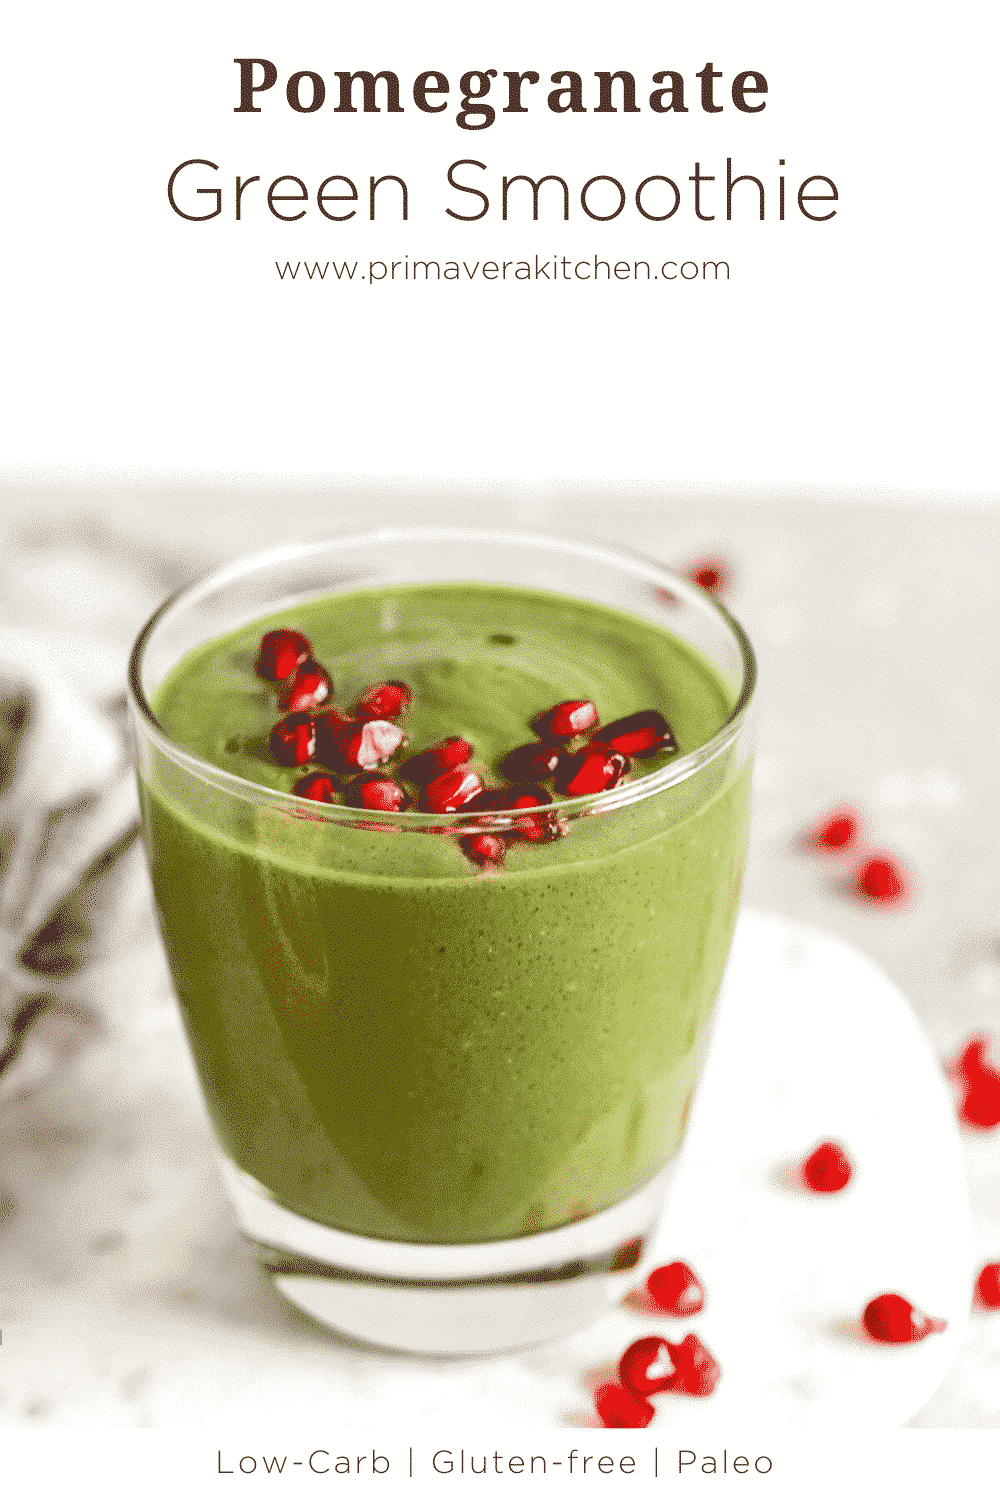 titled photo collage (and shown): Pomegranate Green Smoothie